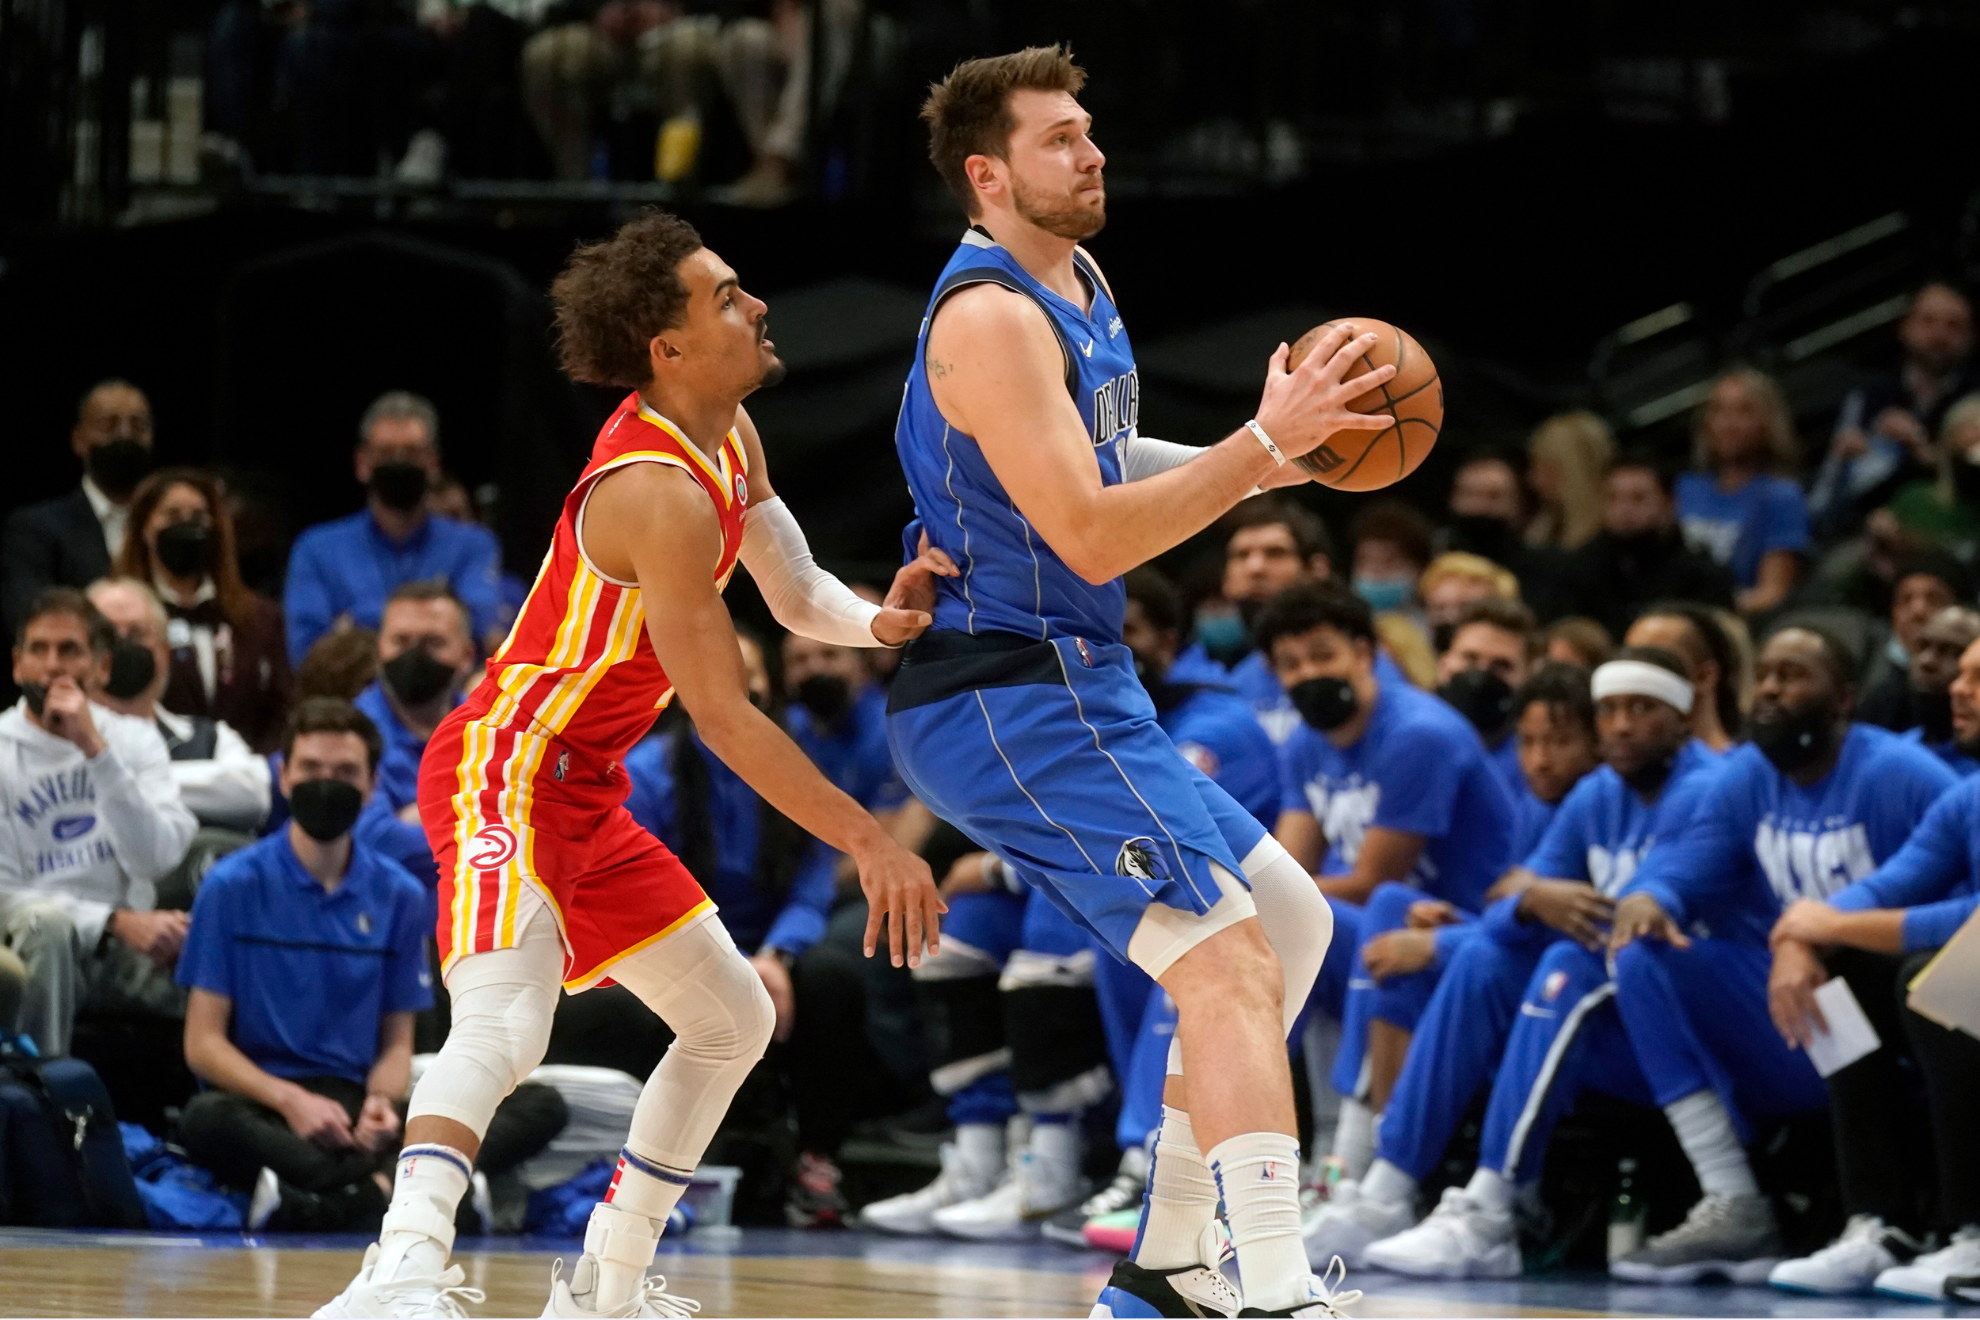 Trae Young and Luka Doncic face each other during an NBA regular season game.